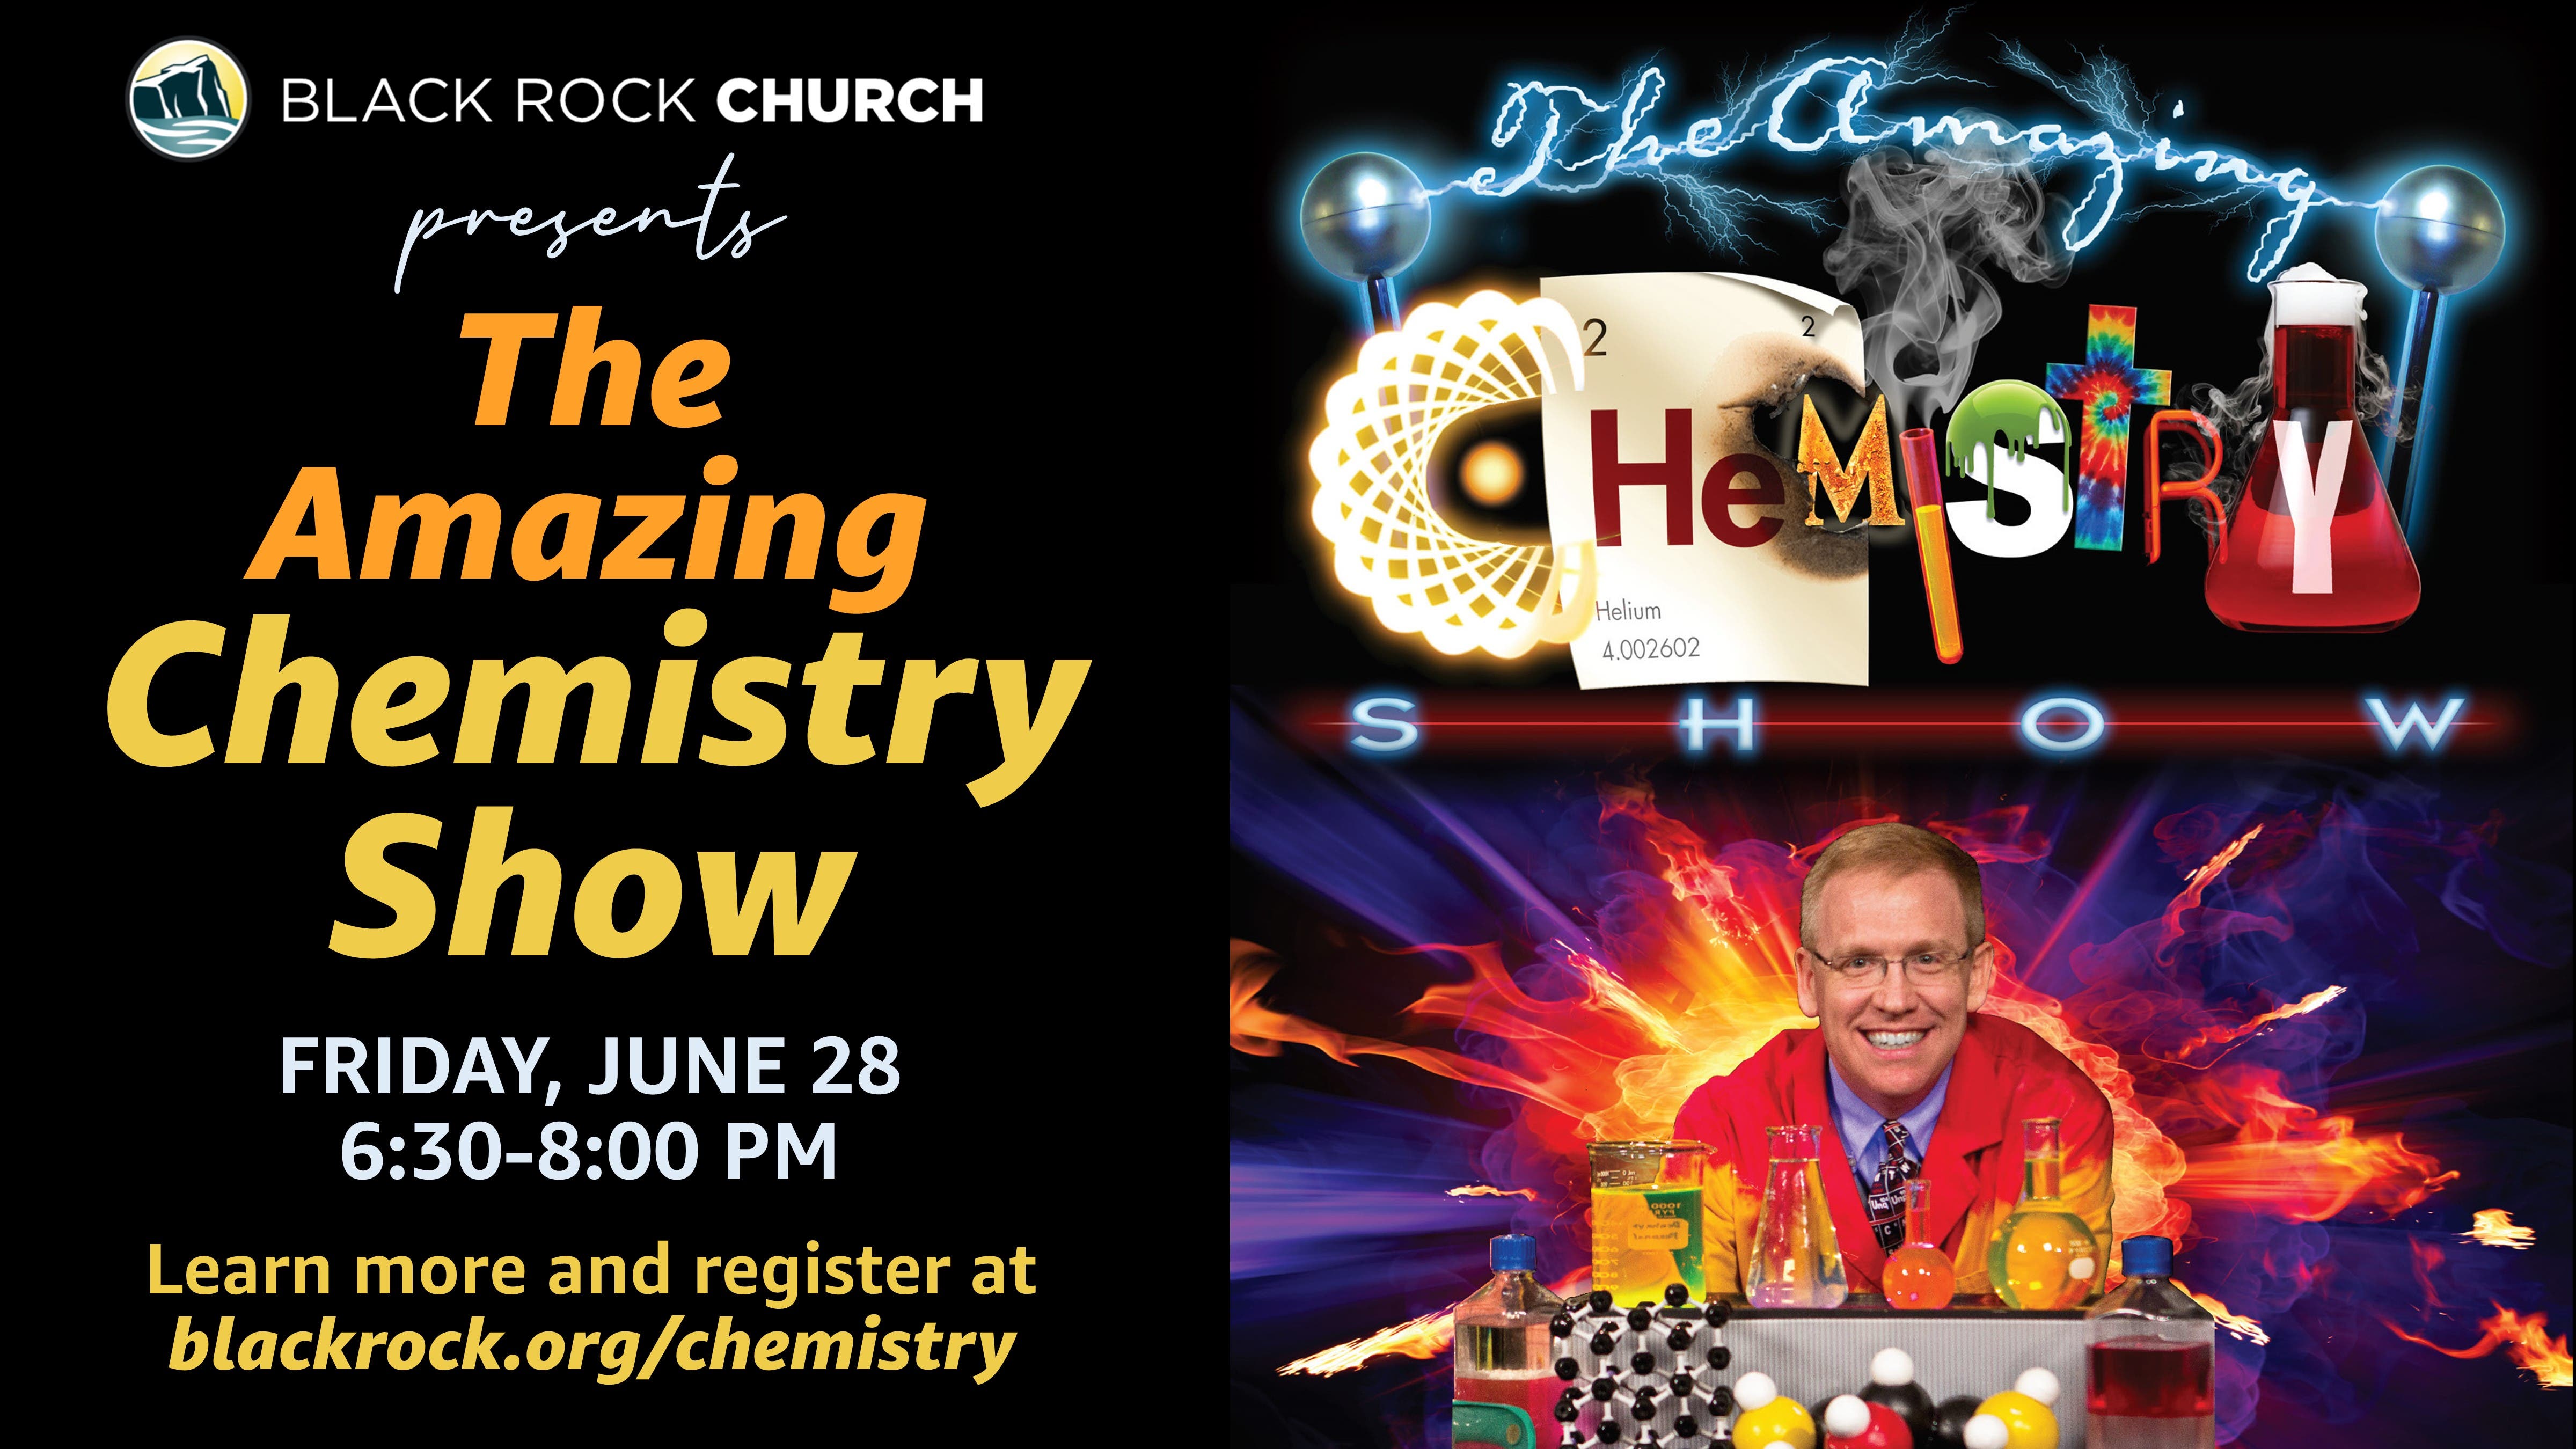 The Amazing Chemistry Show